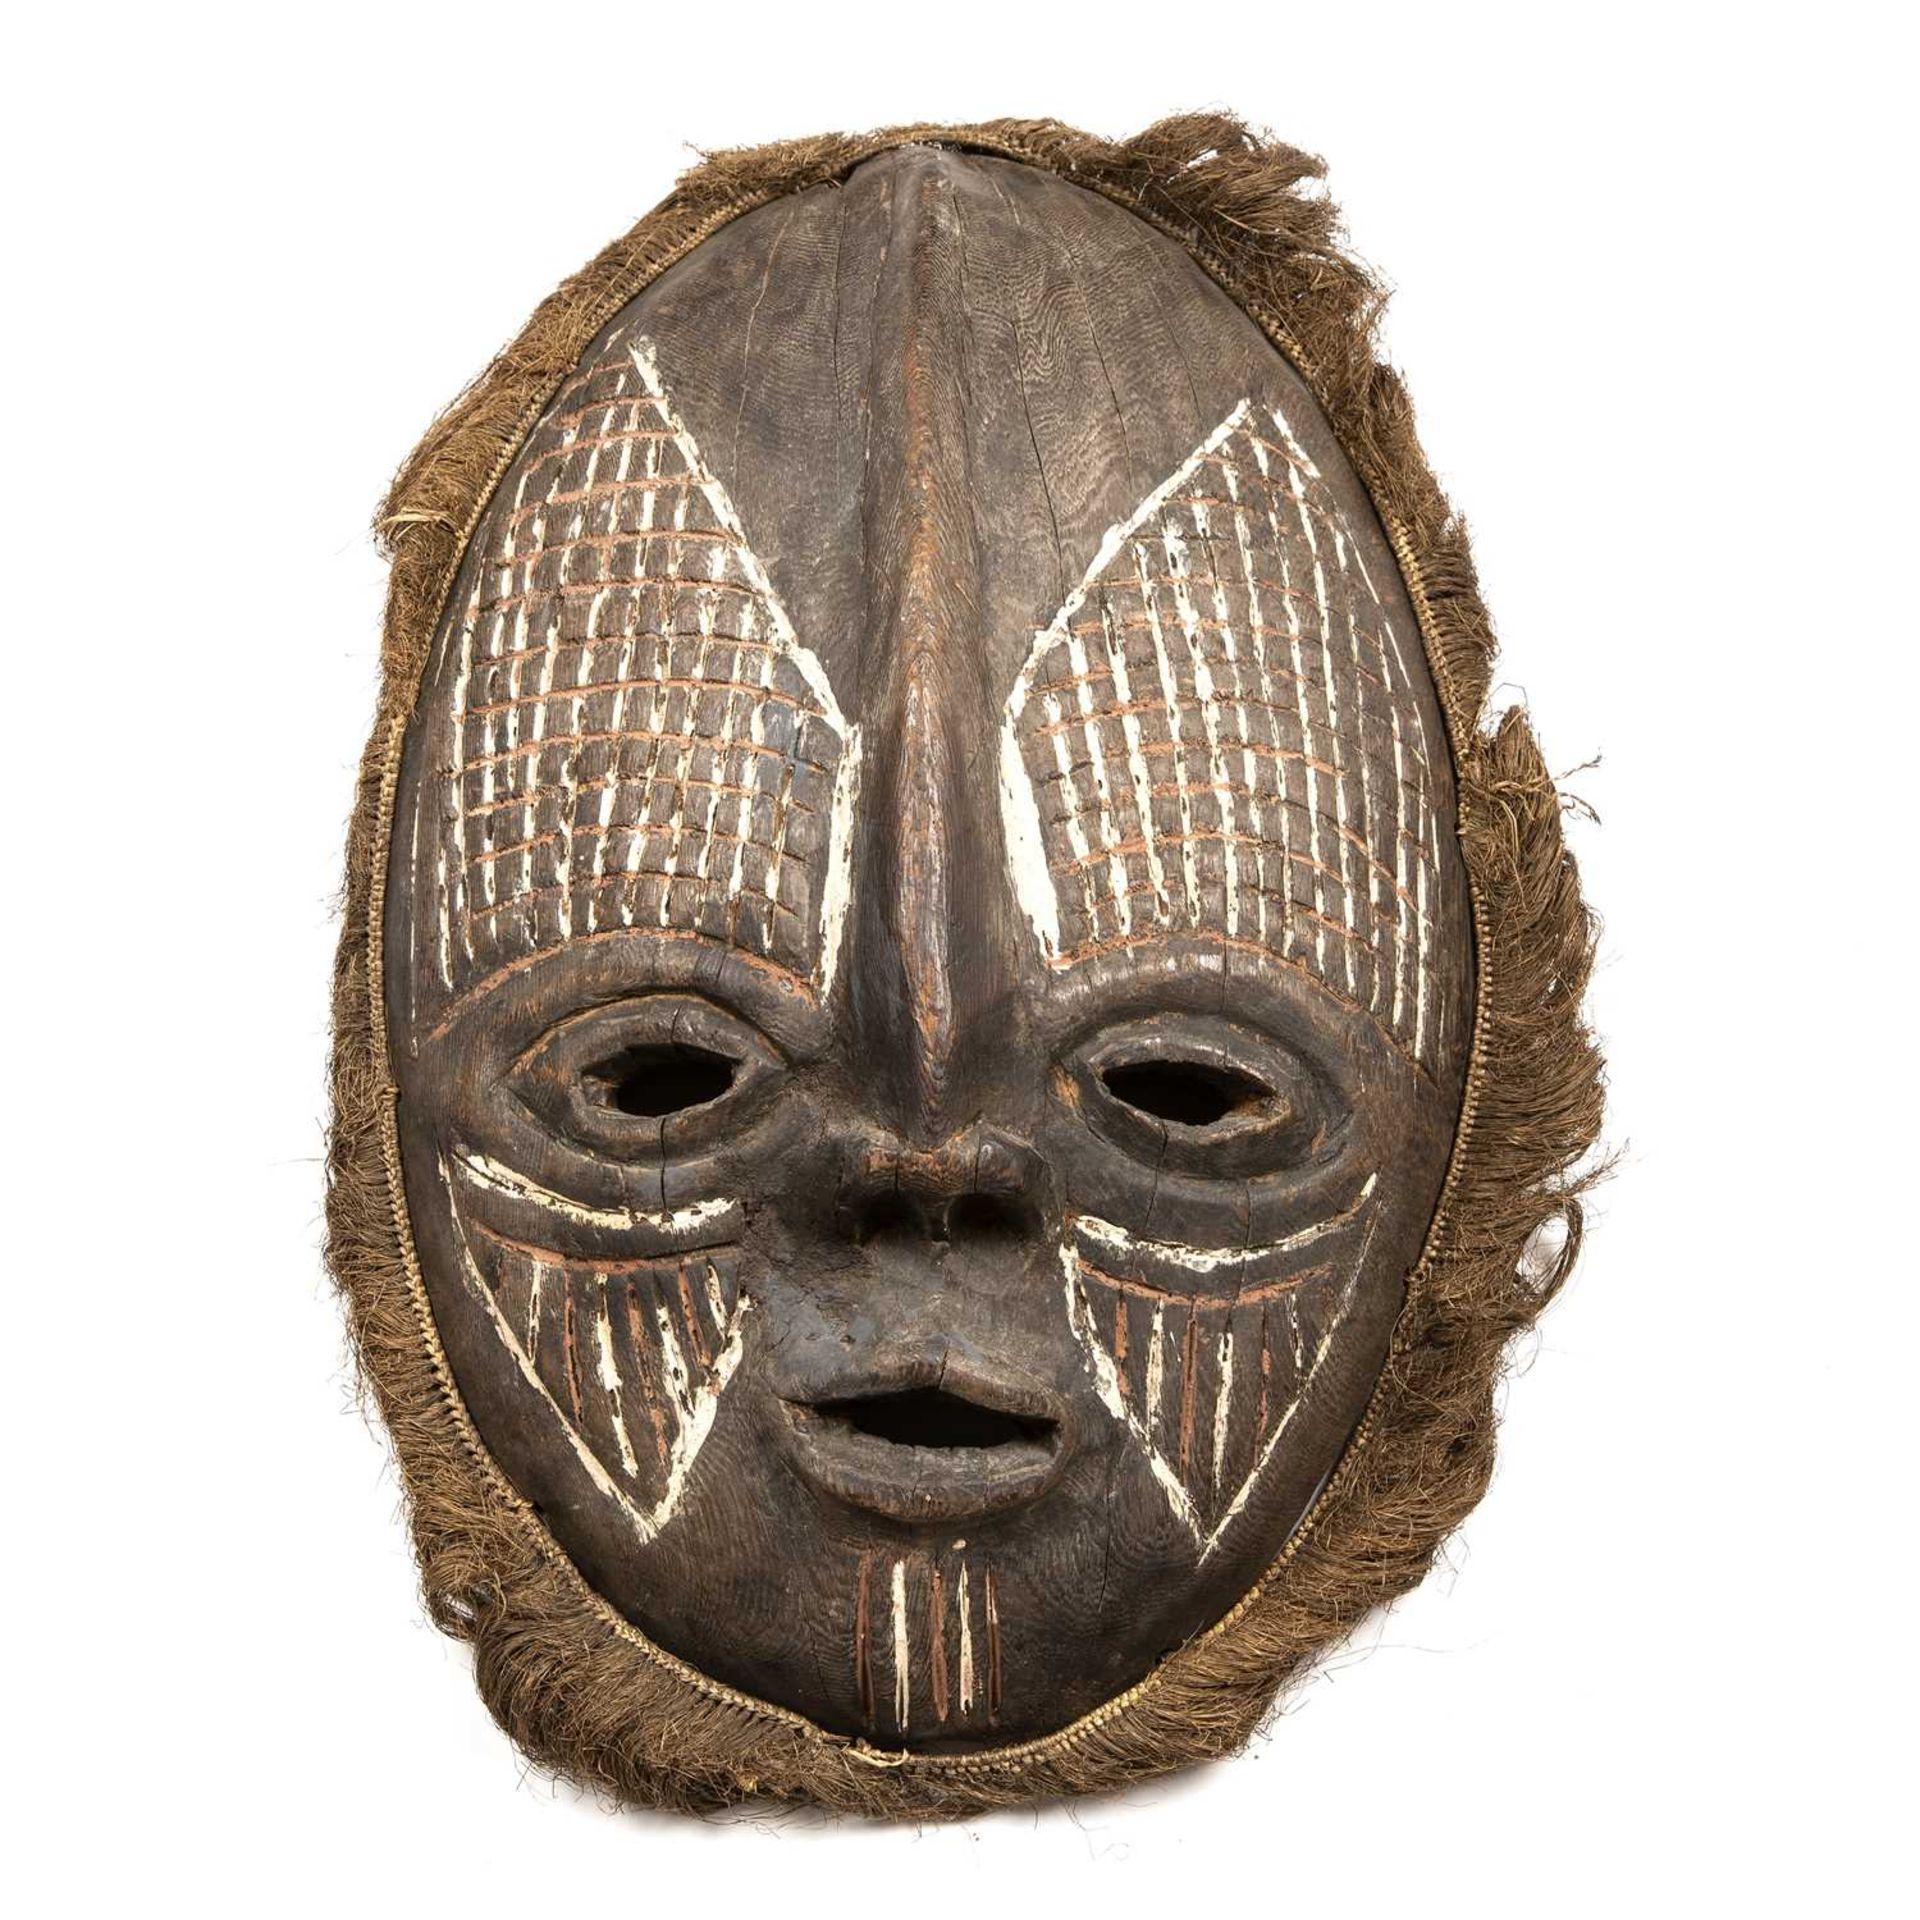 A Papua New Guinea ancestor mask from the Murik lakes area of the Sepik river coast with carved